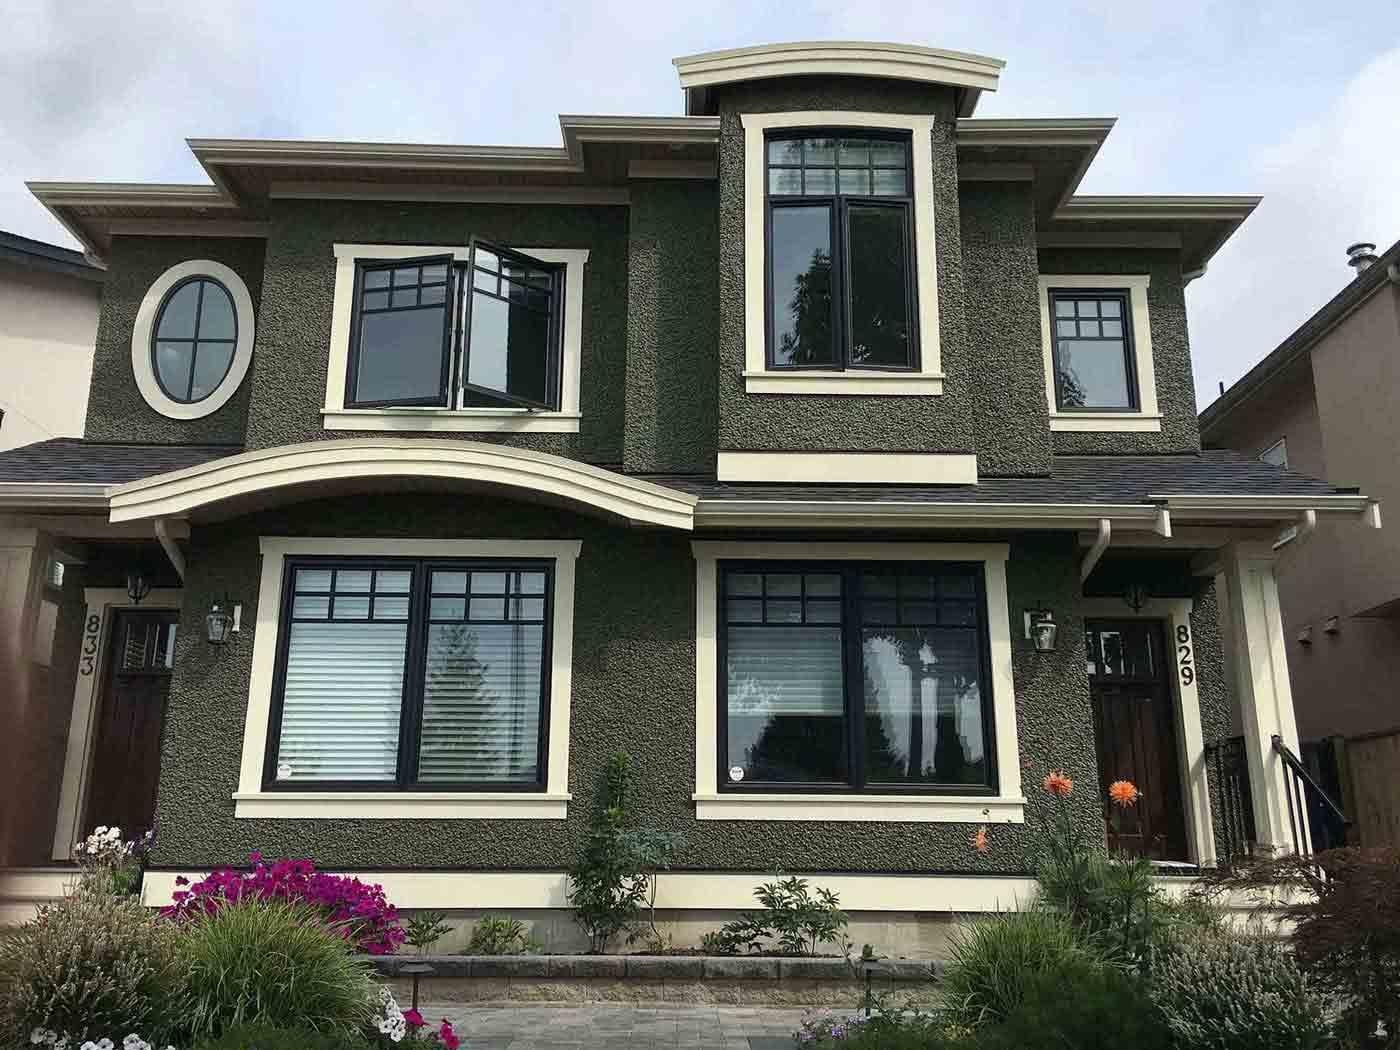 2021 Exterior House Color Trends : See 1 cute home in 3 exterior paint